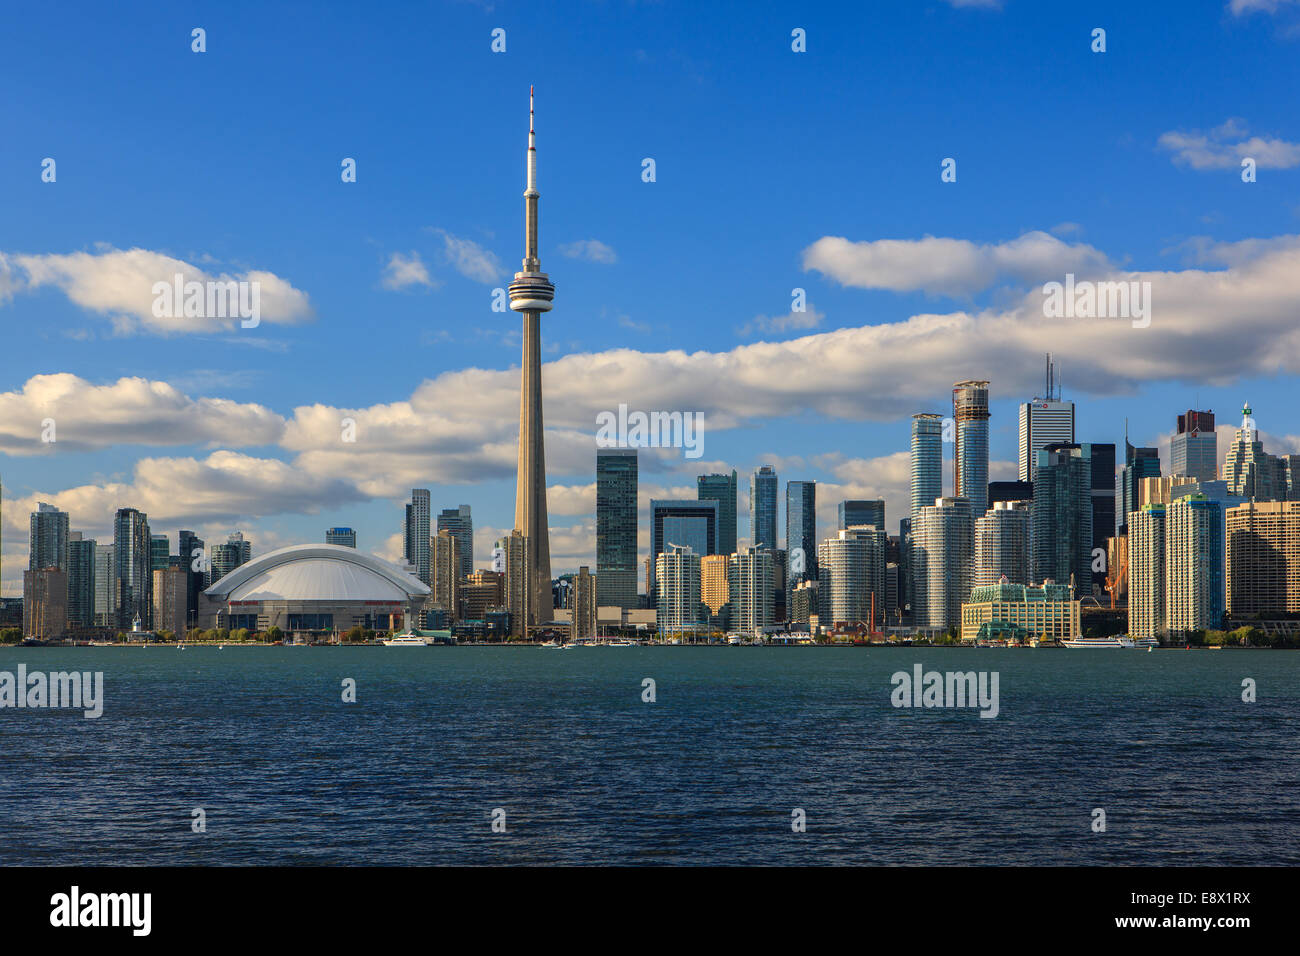 Famous Toronto Skyline with the CN Tower and Rogers Centre taken from the Toronto Islands. Stock Photo